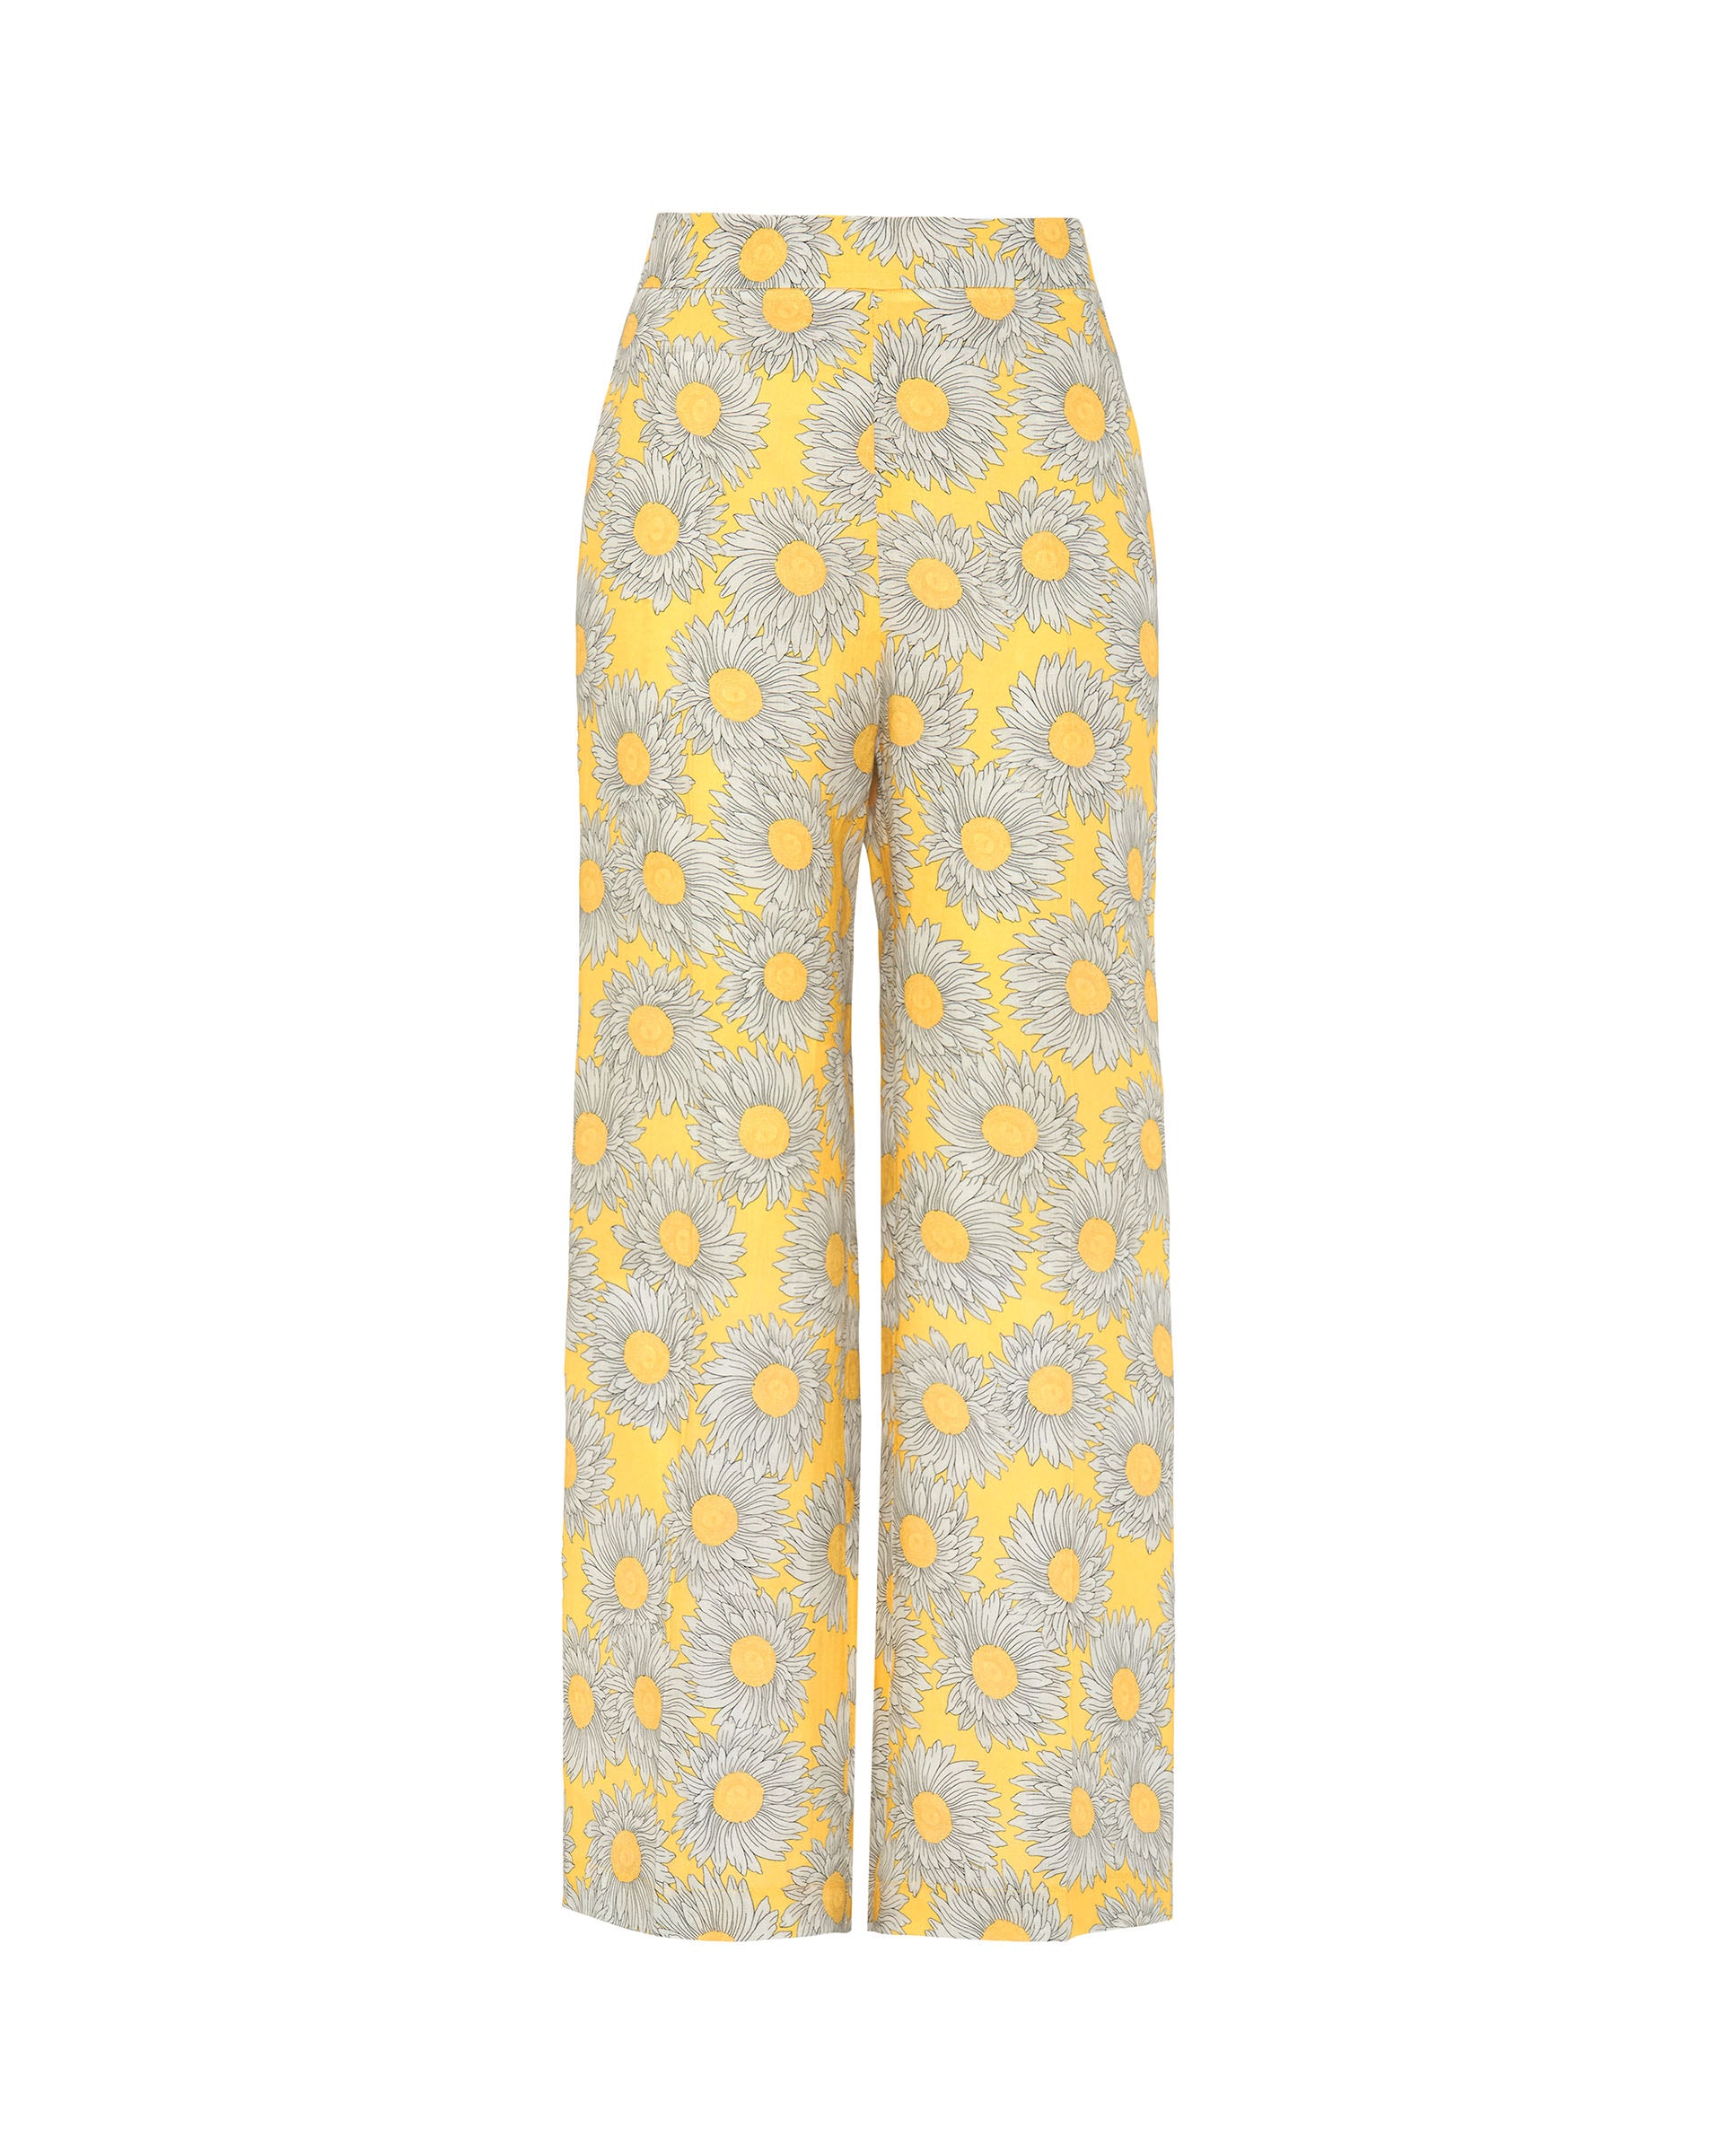 Yellow floral print linen trousers by MIRTO